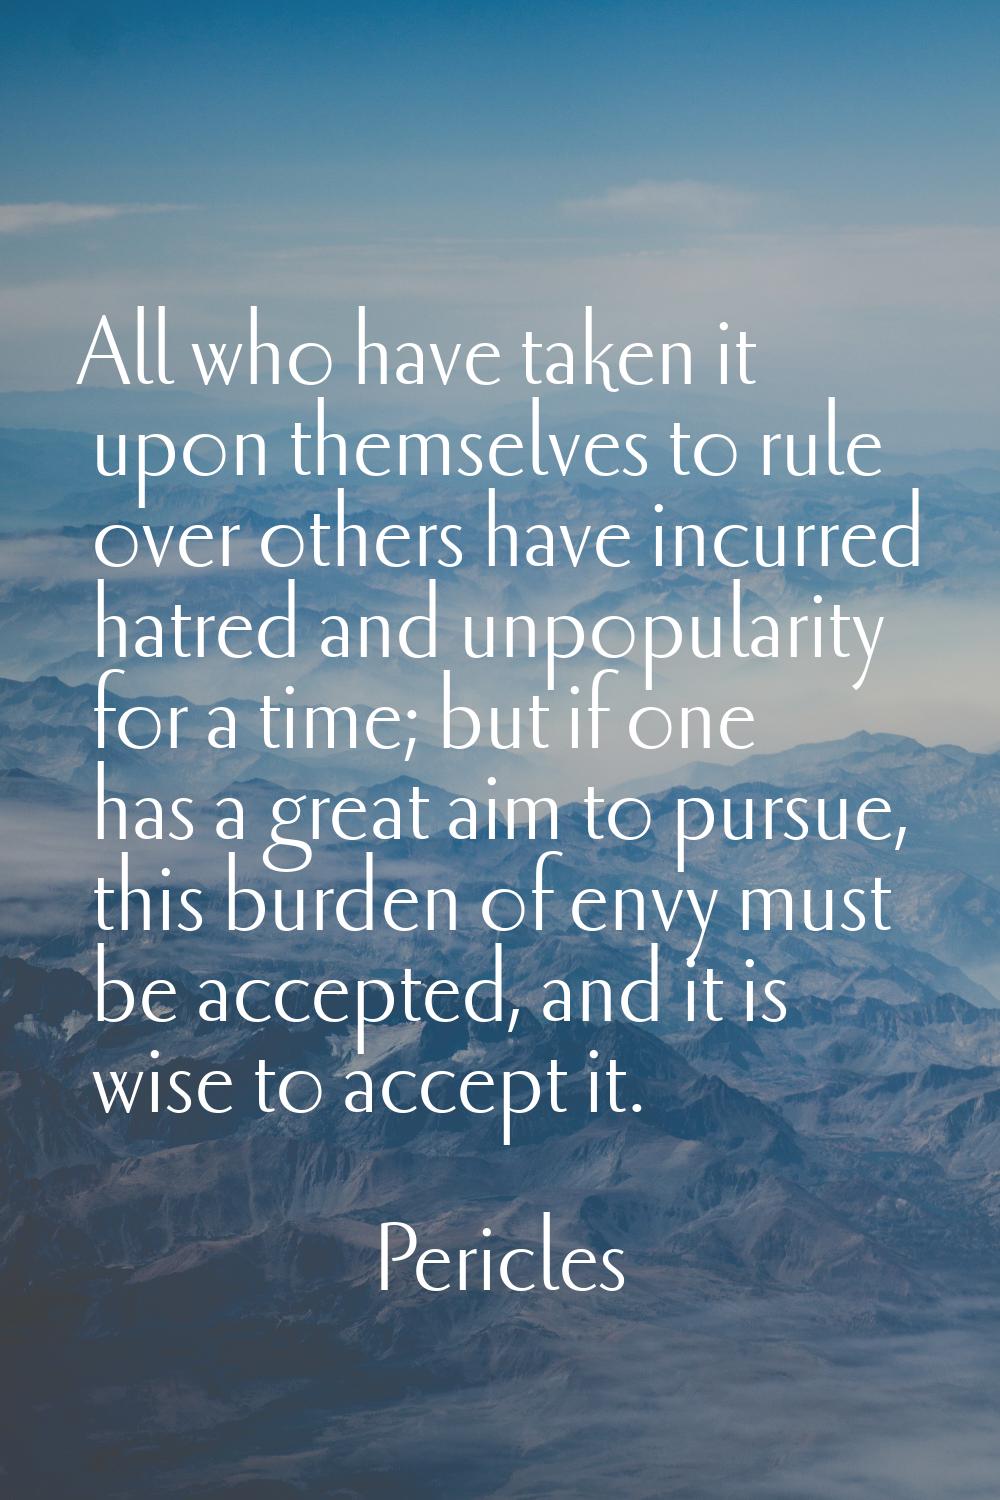 All who have taken it upon themselves to rule over others have incurred hatred and unpopularity for